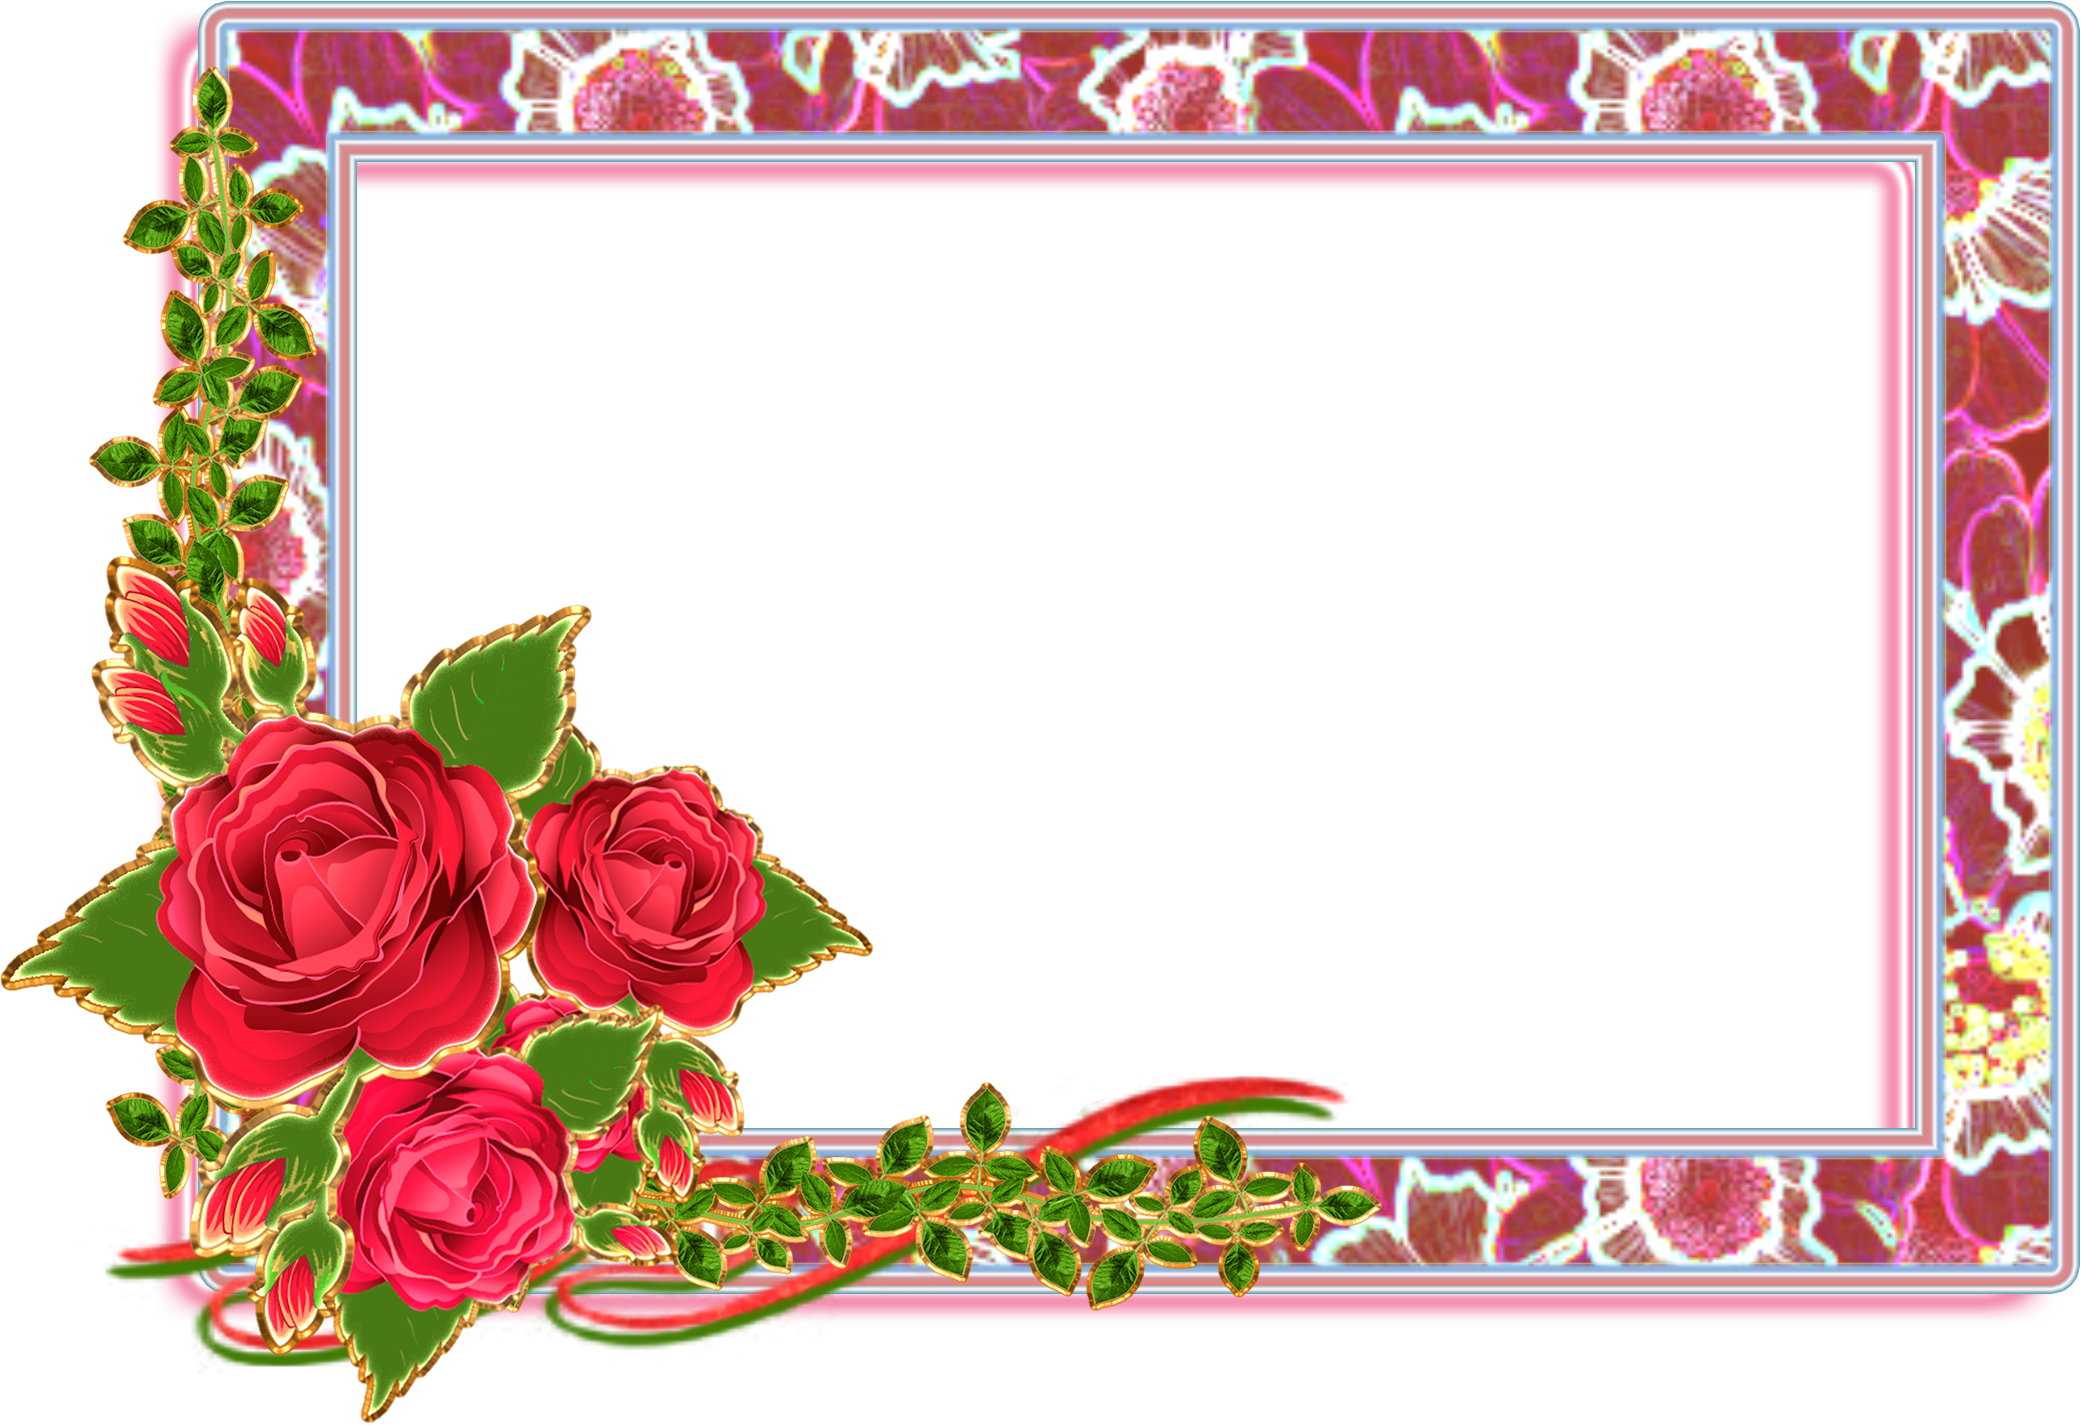 Flower Frame Png Classic Wallpaper Borders And Frames- - Flower Background Frame Png - HD Wallpaper 